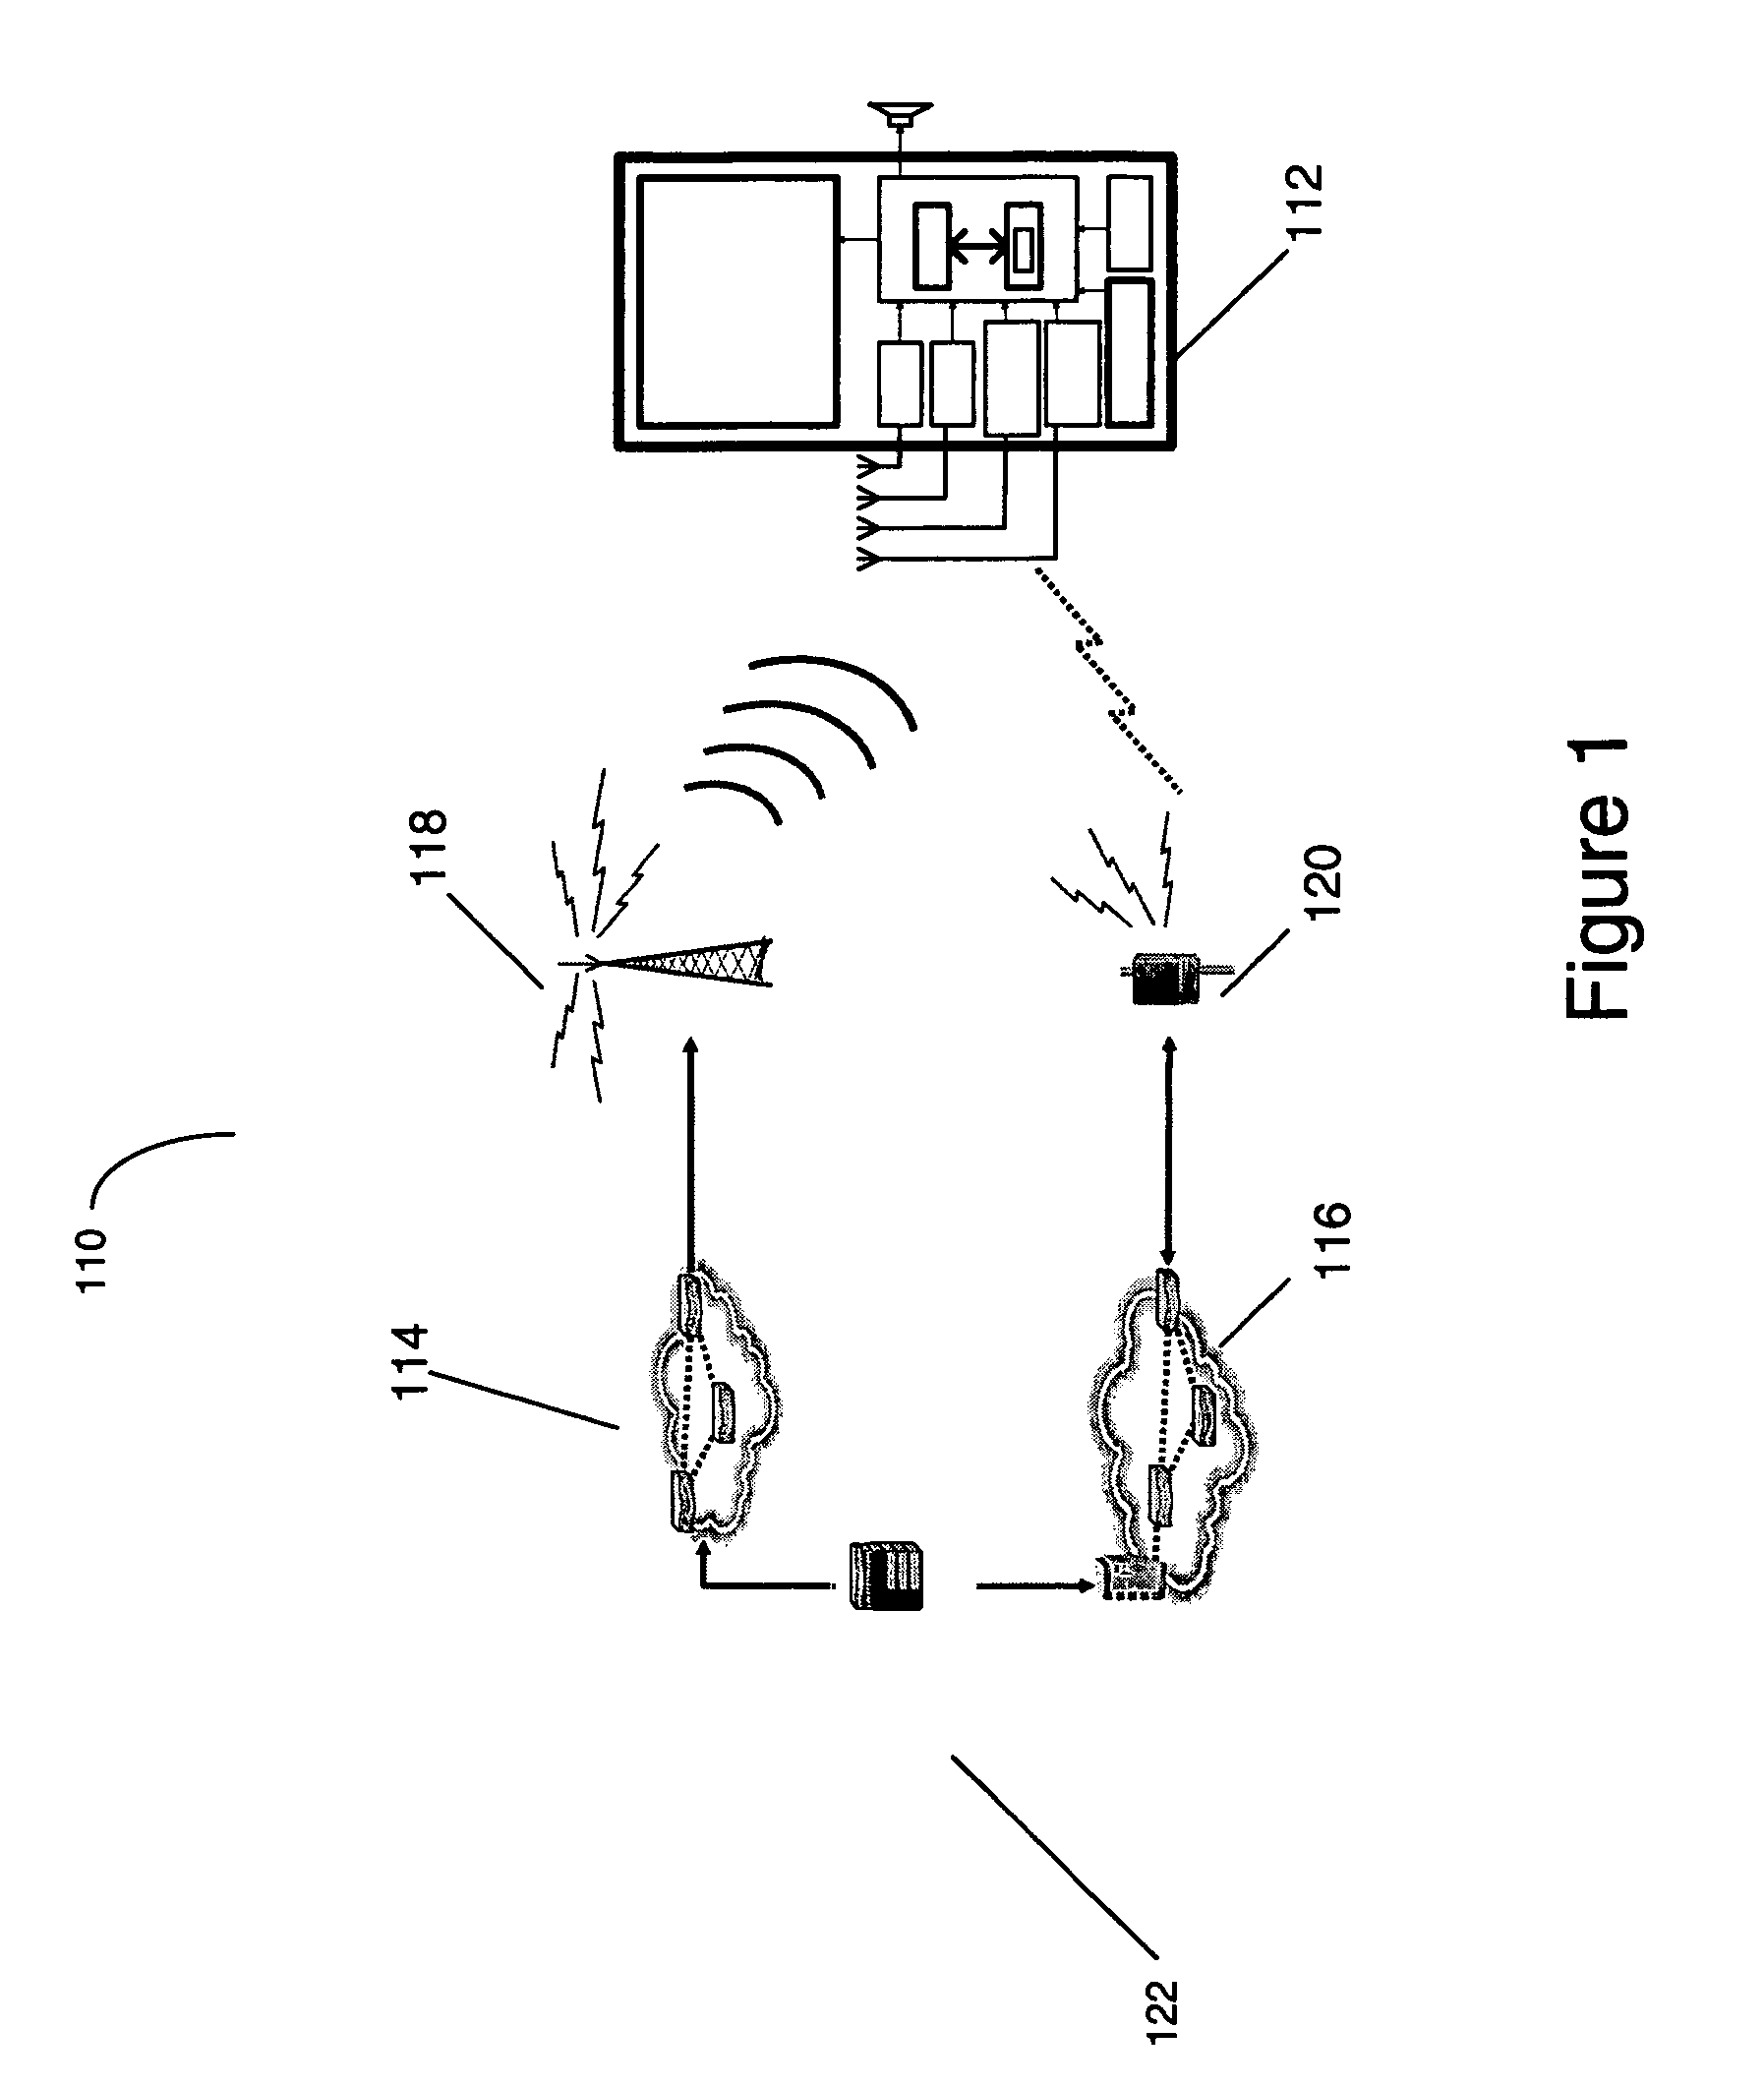 Application specific key buttons in a portable device